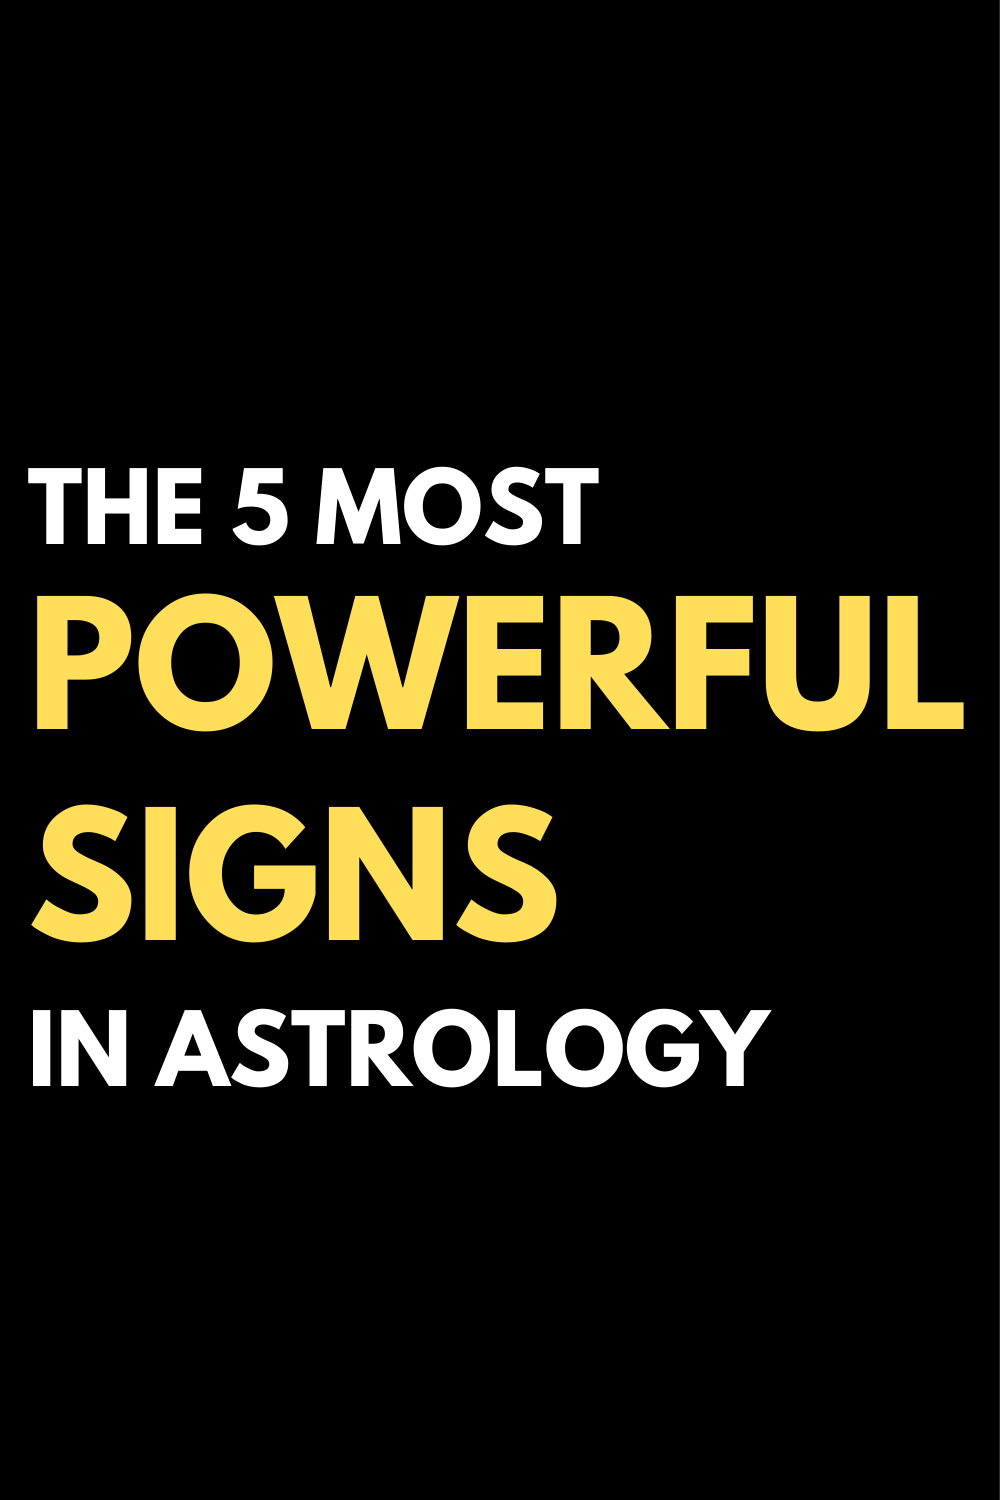 The 5 most powerful signs in astrology